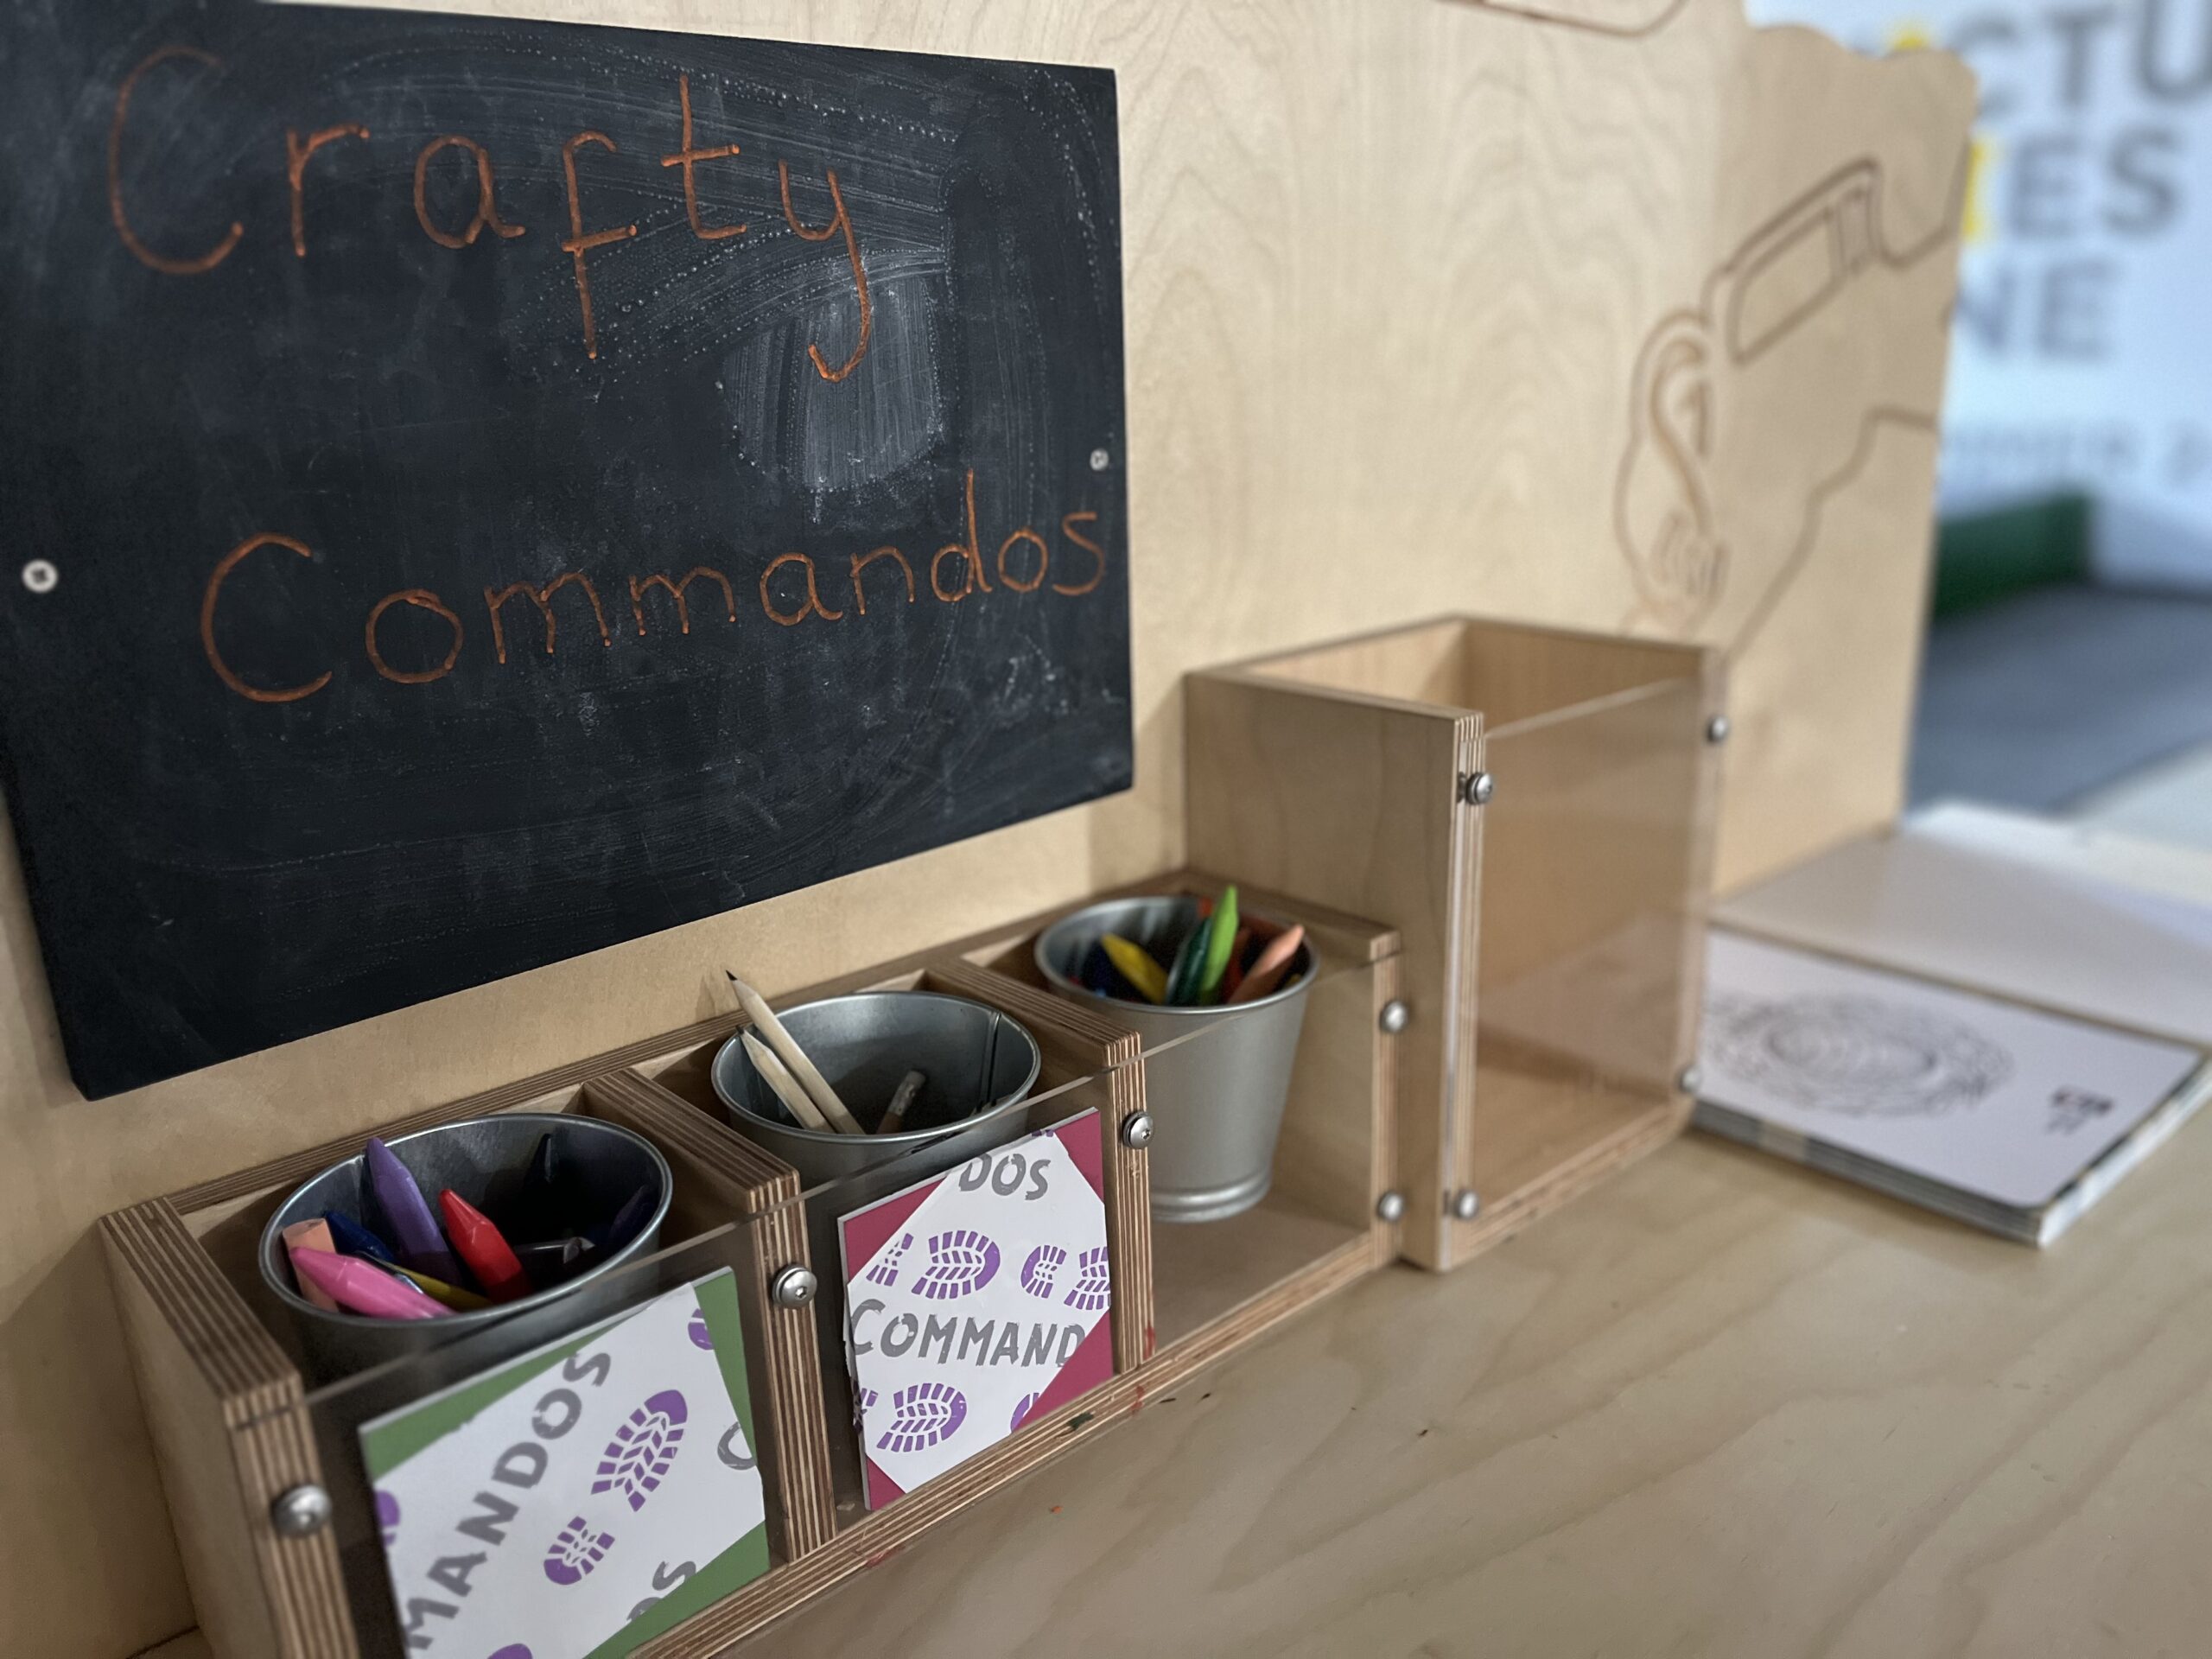 Crafty Commandos activity station at Action Stations